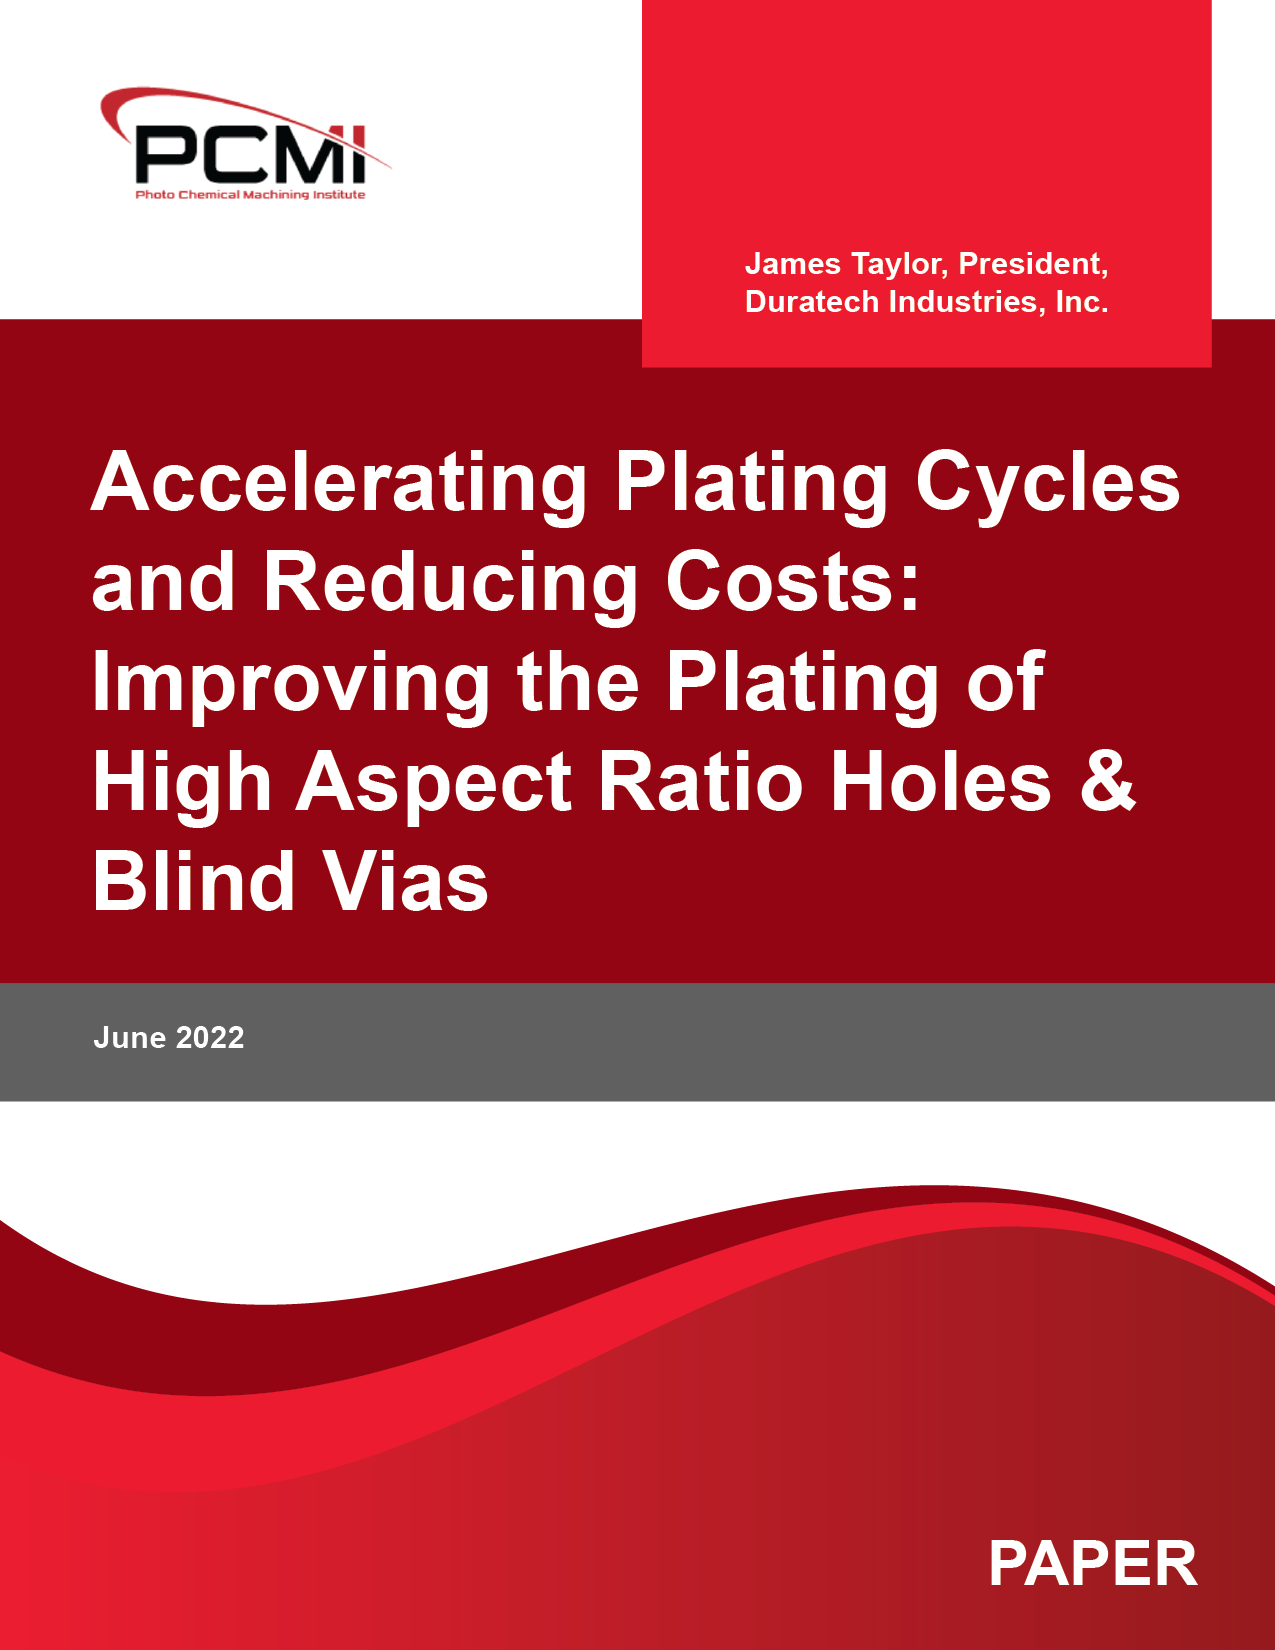 Accelerating Plating Cycles and Reducing Costs: Improving the Plating of High Aspect Ratio Holes & Blind Vias